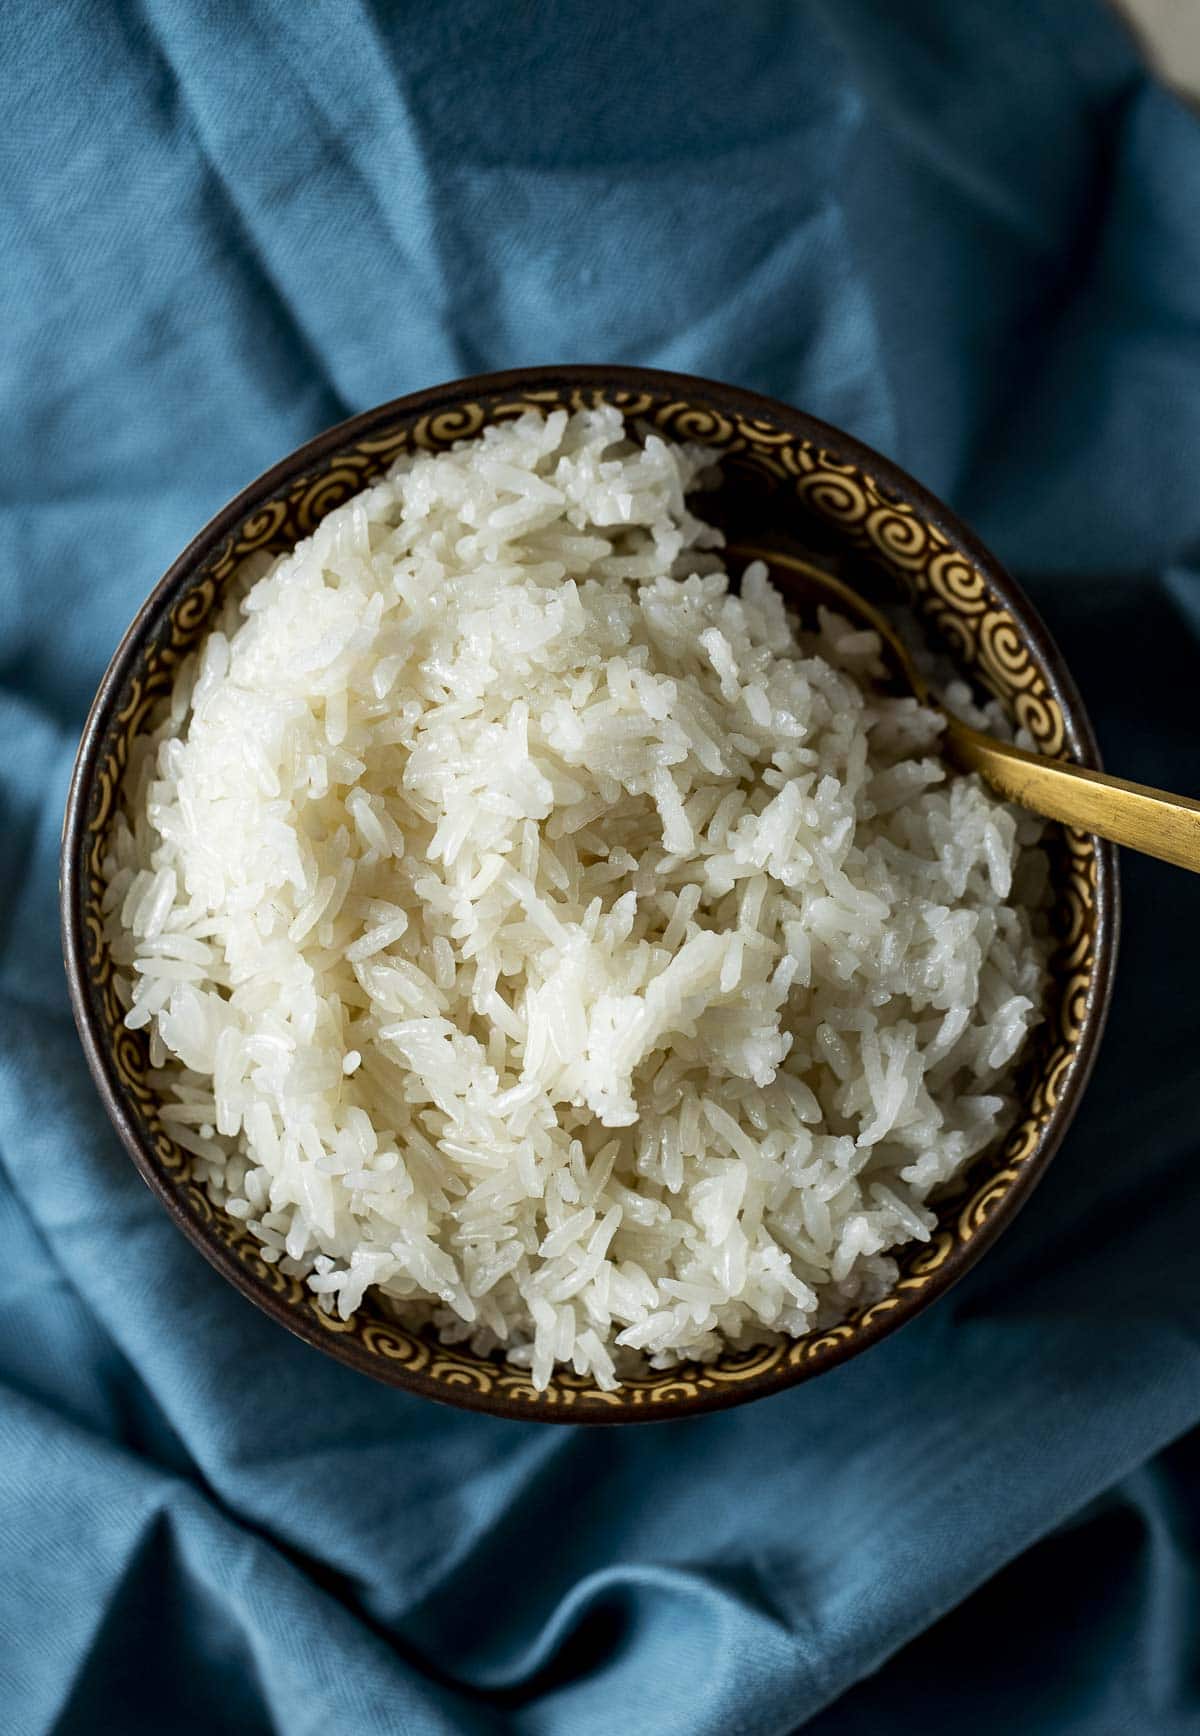 Overhead view of jasmine rice in a bowl with a spoon inserted into it.